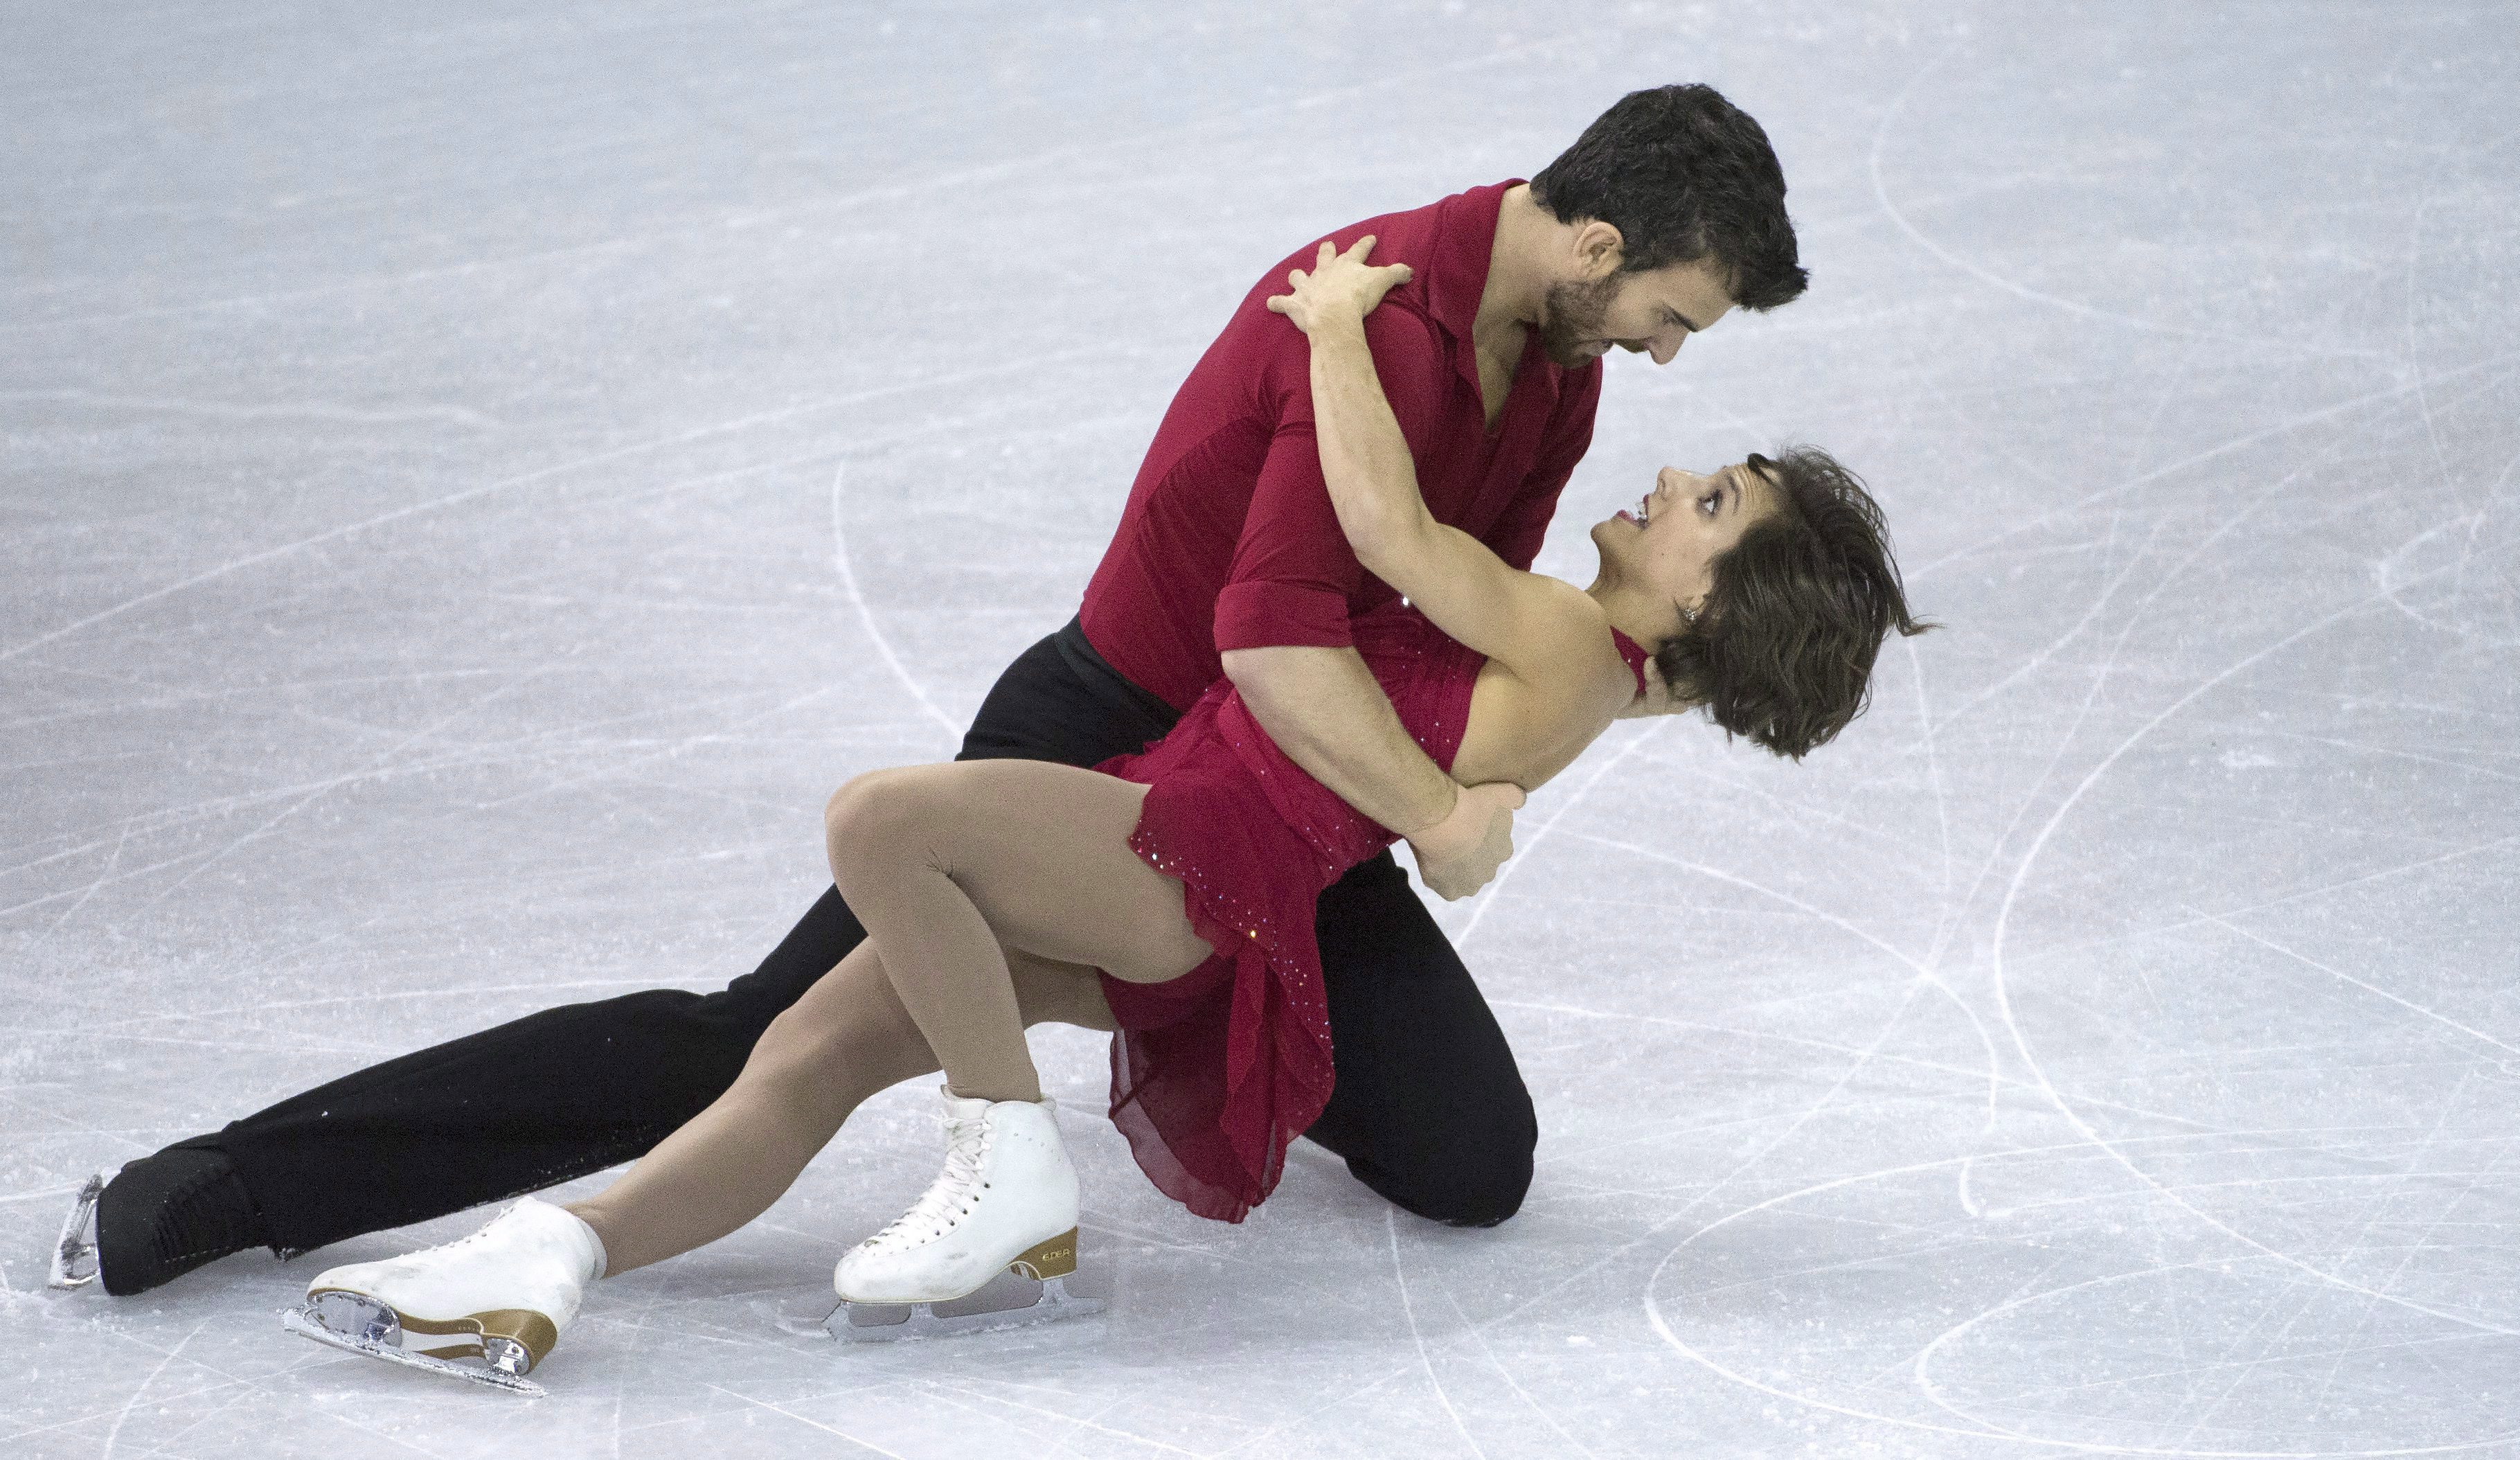 Meagan Duhamel and Eric Radford, of Canada, at the end of their short program at Skate Canada International in Lethbridge, Alta., on Friday, Oct. 30, 2015. THE CANADIAN PRESS/Jonathan Hayward